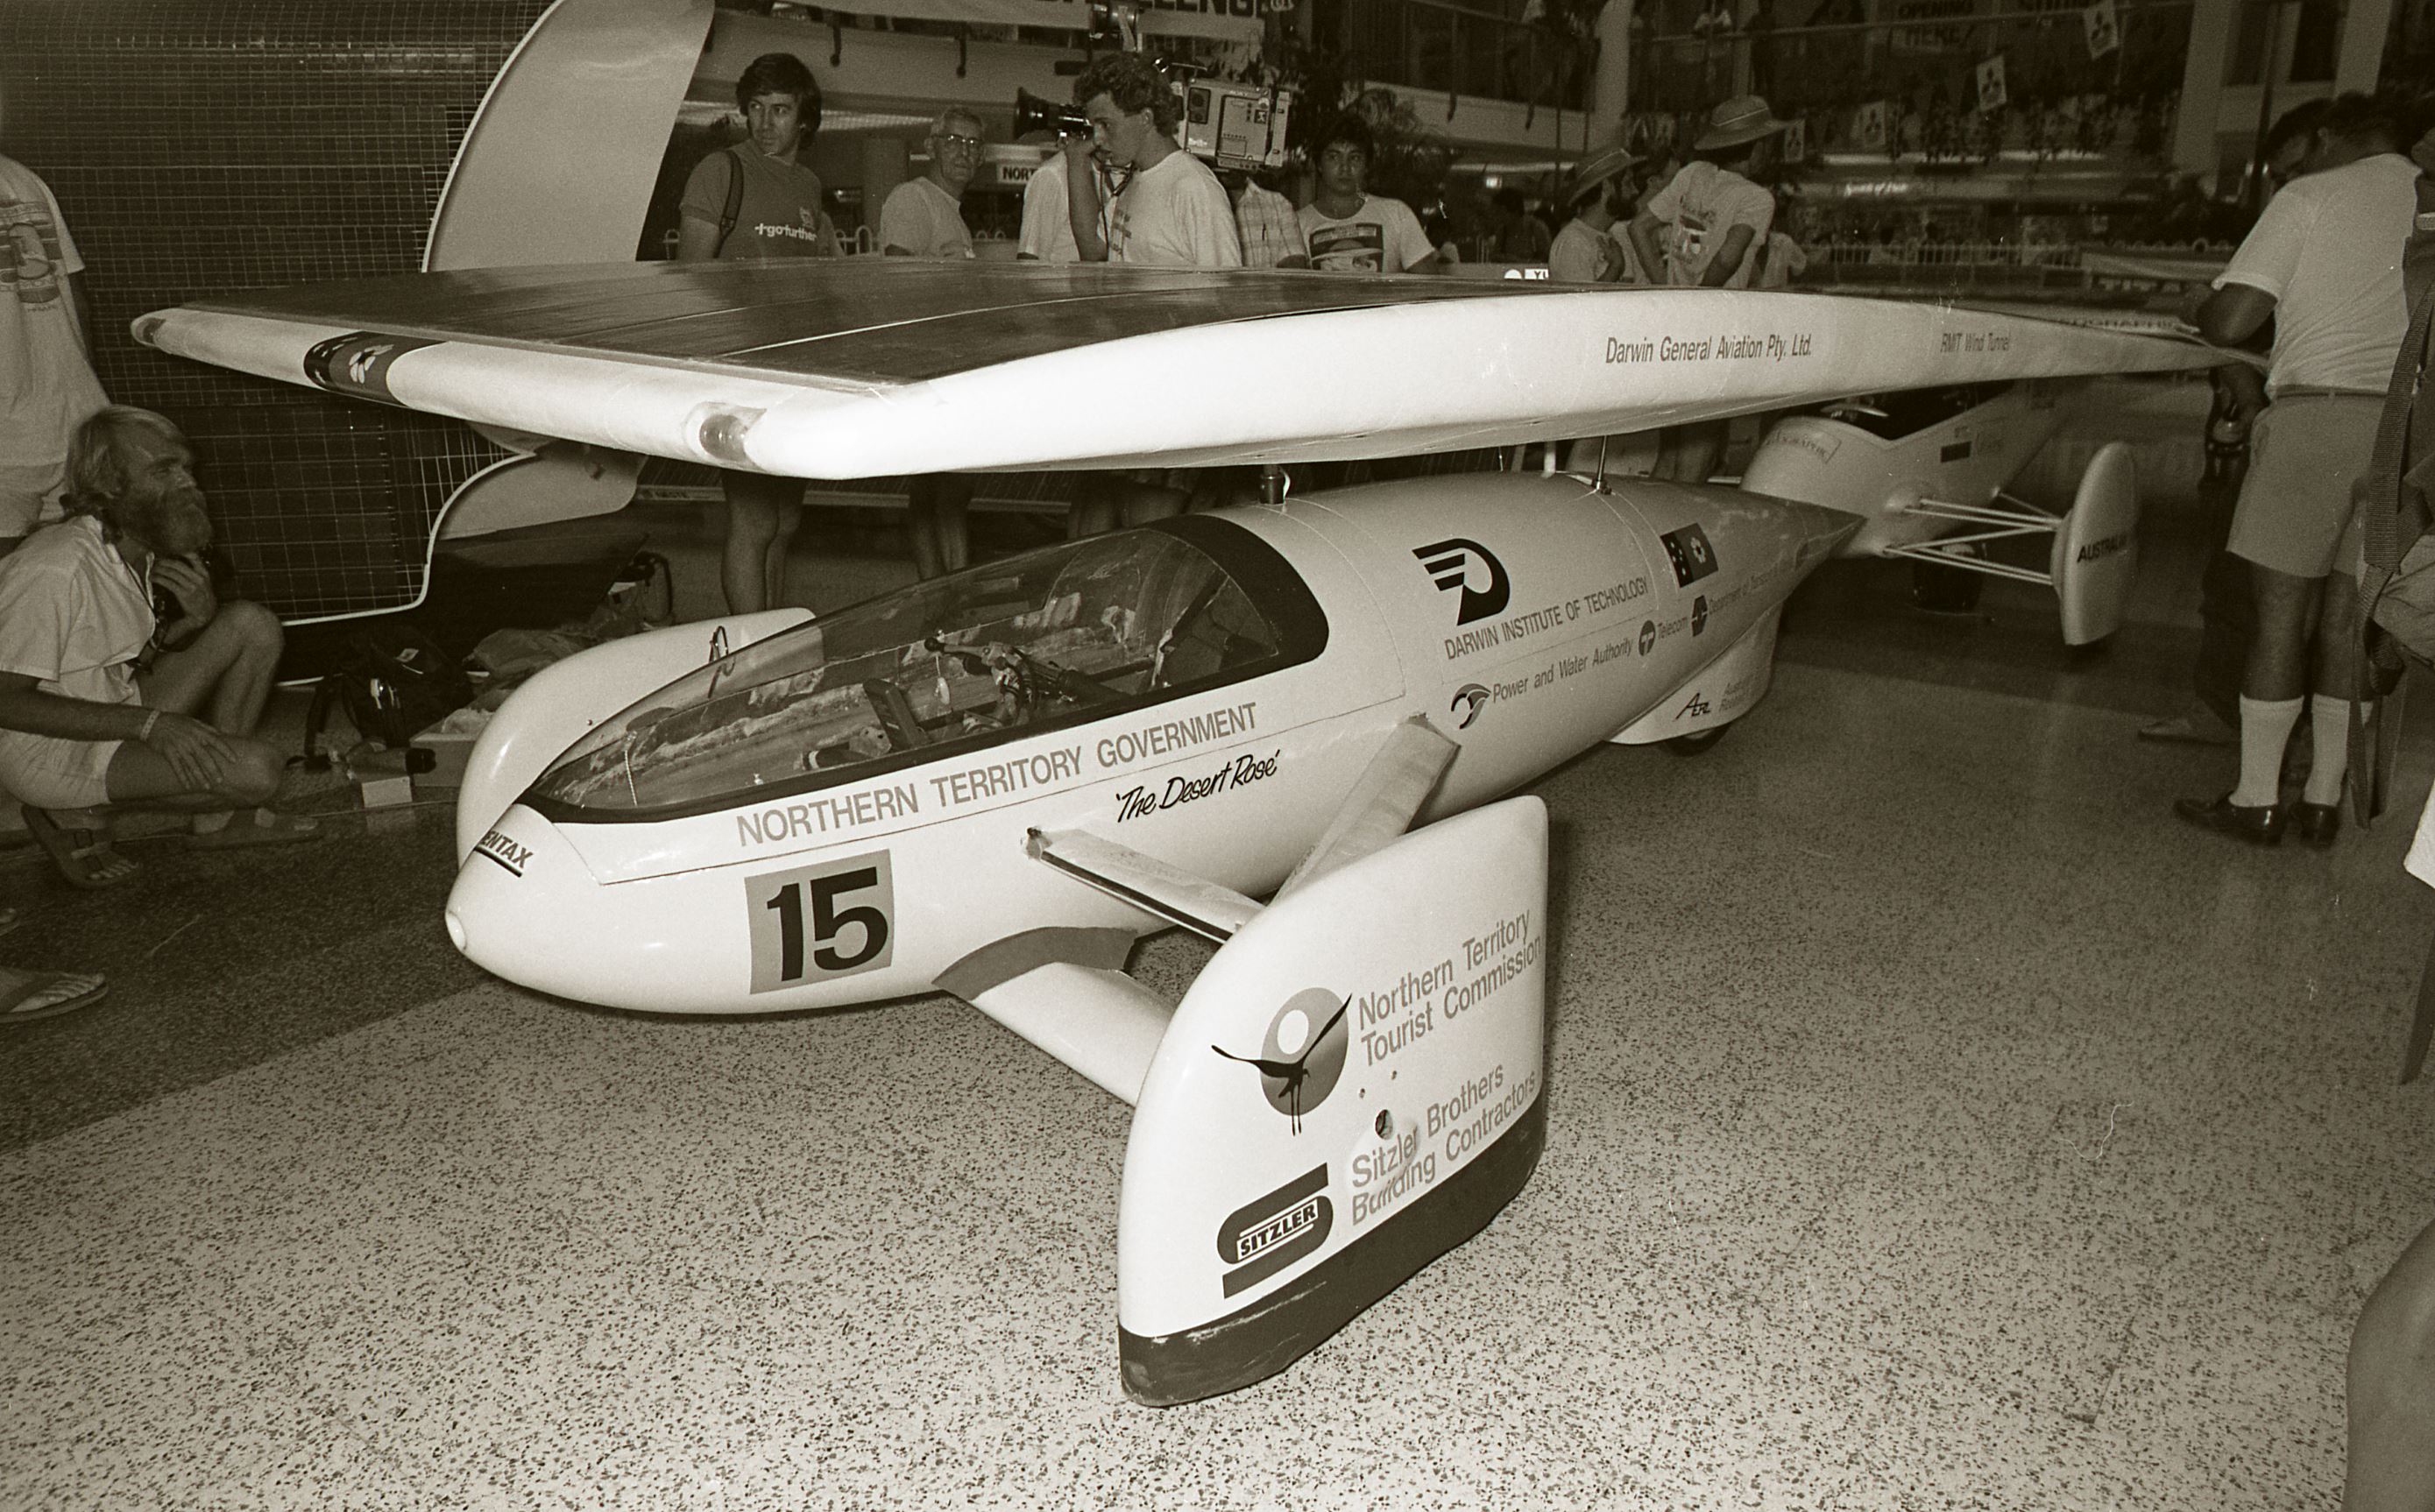 [Solar Cars on display at Casuarina Square, 30 October 1987] <br />Image courtesy of Northern Territory Archives Service, Department of Chief Minister, NTRS 3823, Item BW2685, 30.